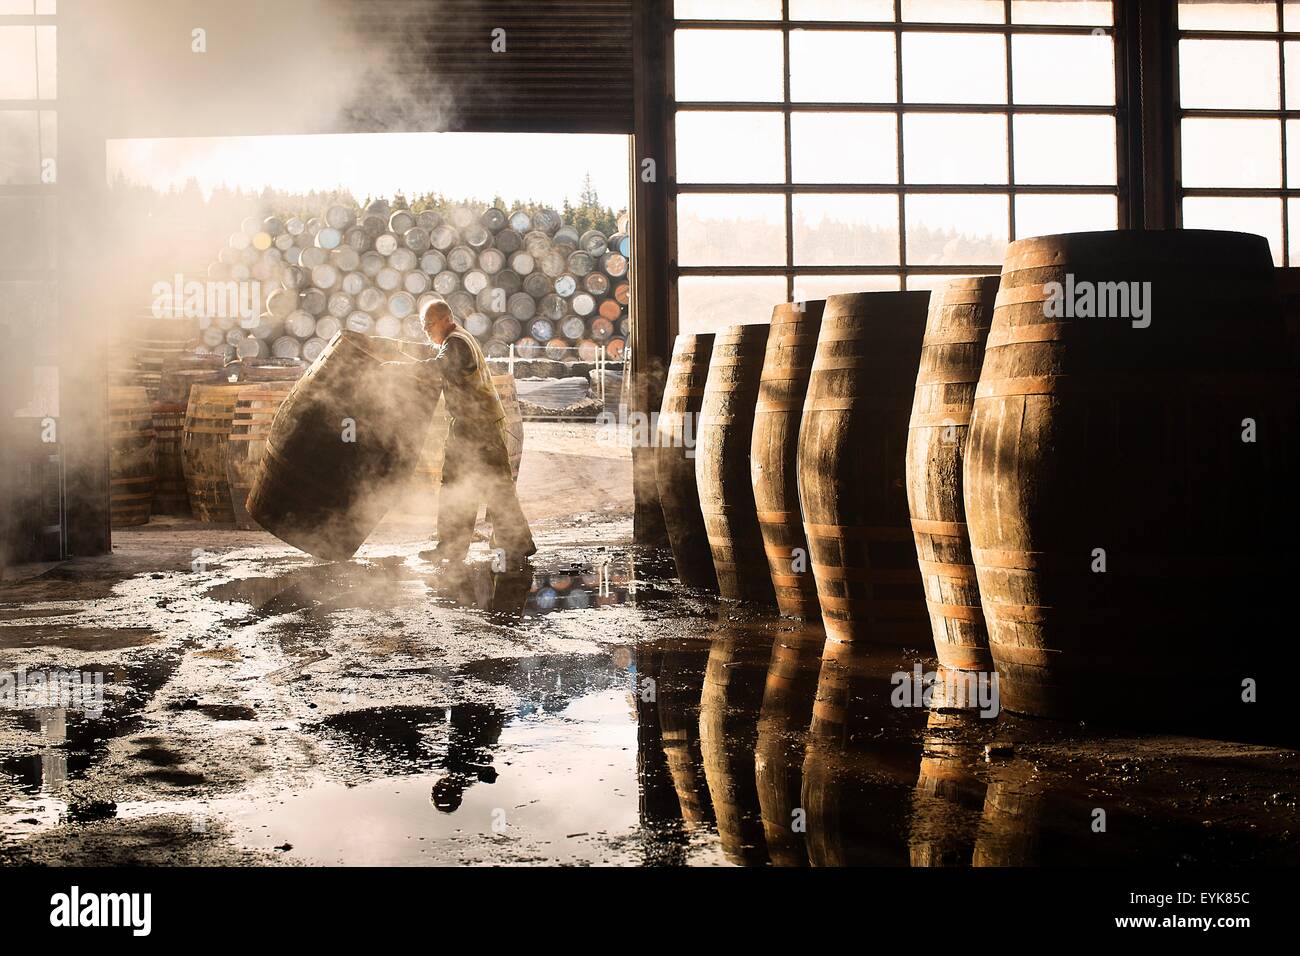 Male cooper working in cooperage with whisky casks Stock Photo